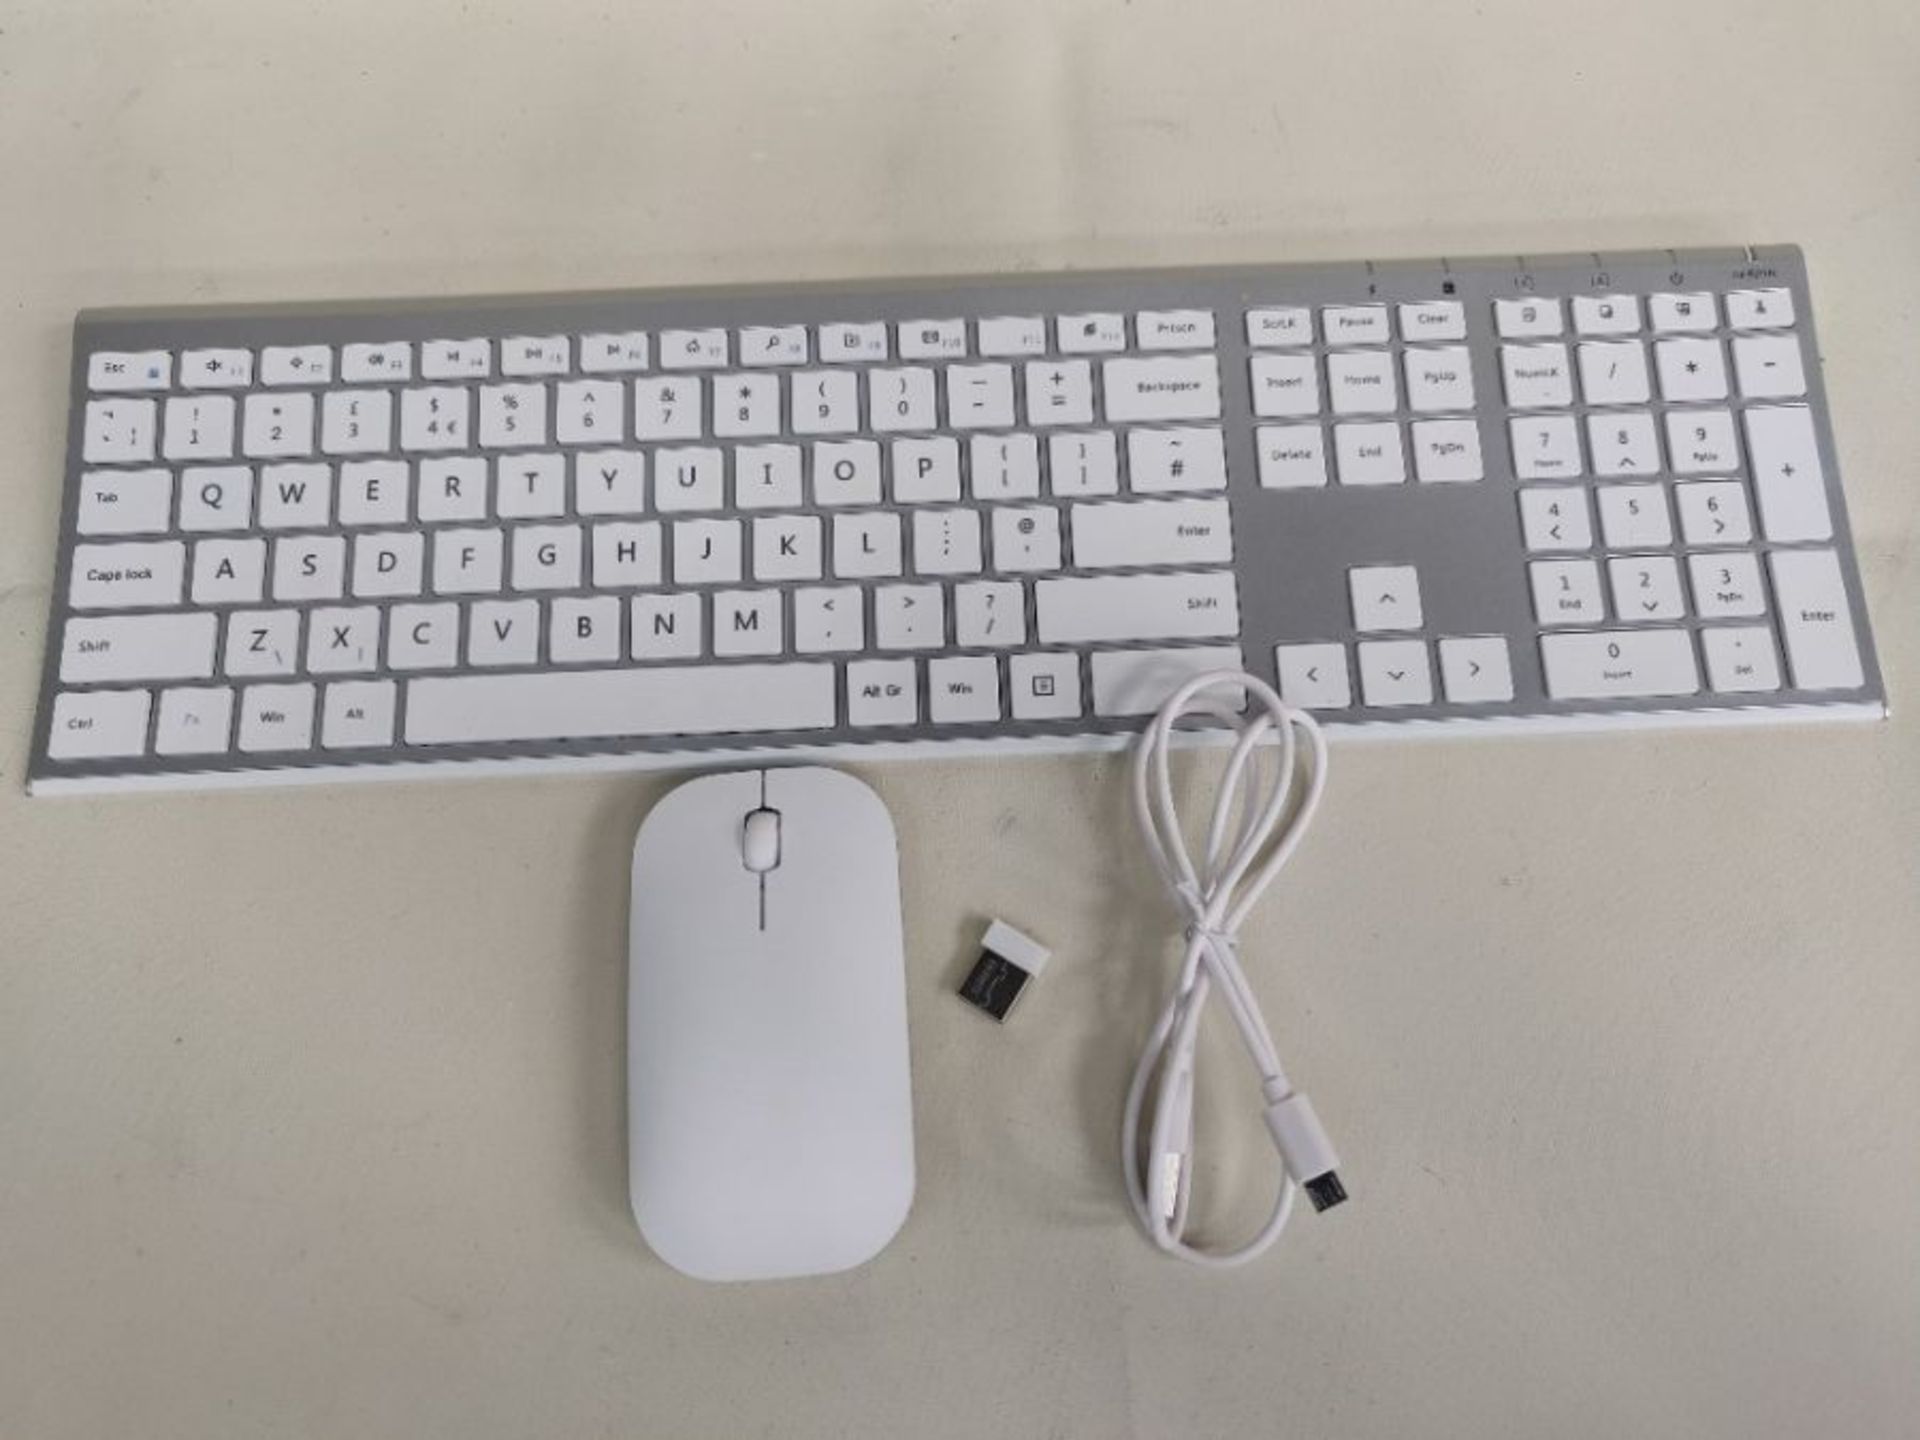 Wireless Rechargeable Keyboard Mouse, Jelly Comb KUS015F 2.4G Full Size Ultra Slim Key - Image 2 of 2